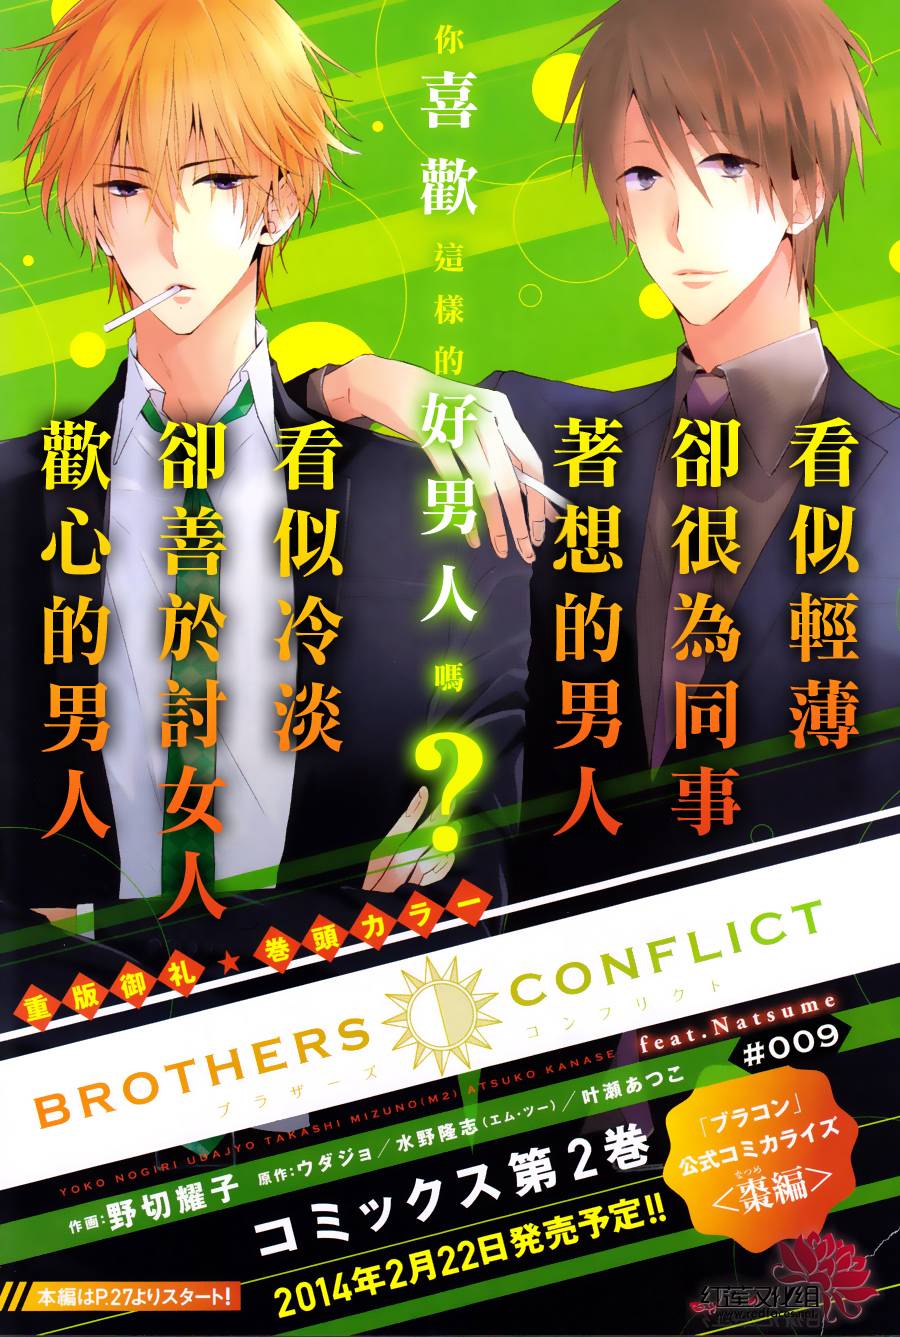 Brothers Conflict 棗篇 第09話 漫畫線上看 動漫戲說 Acgn Cc